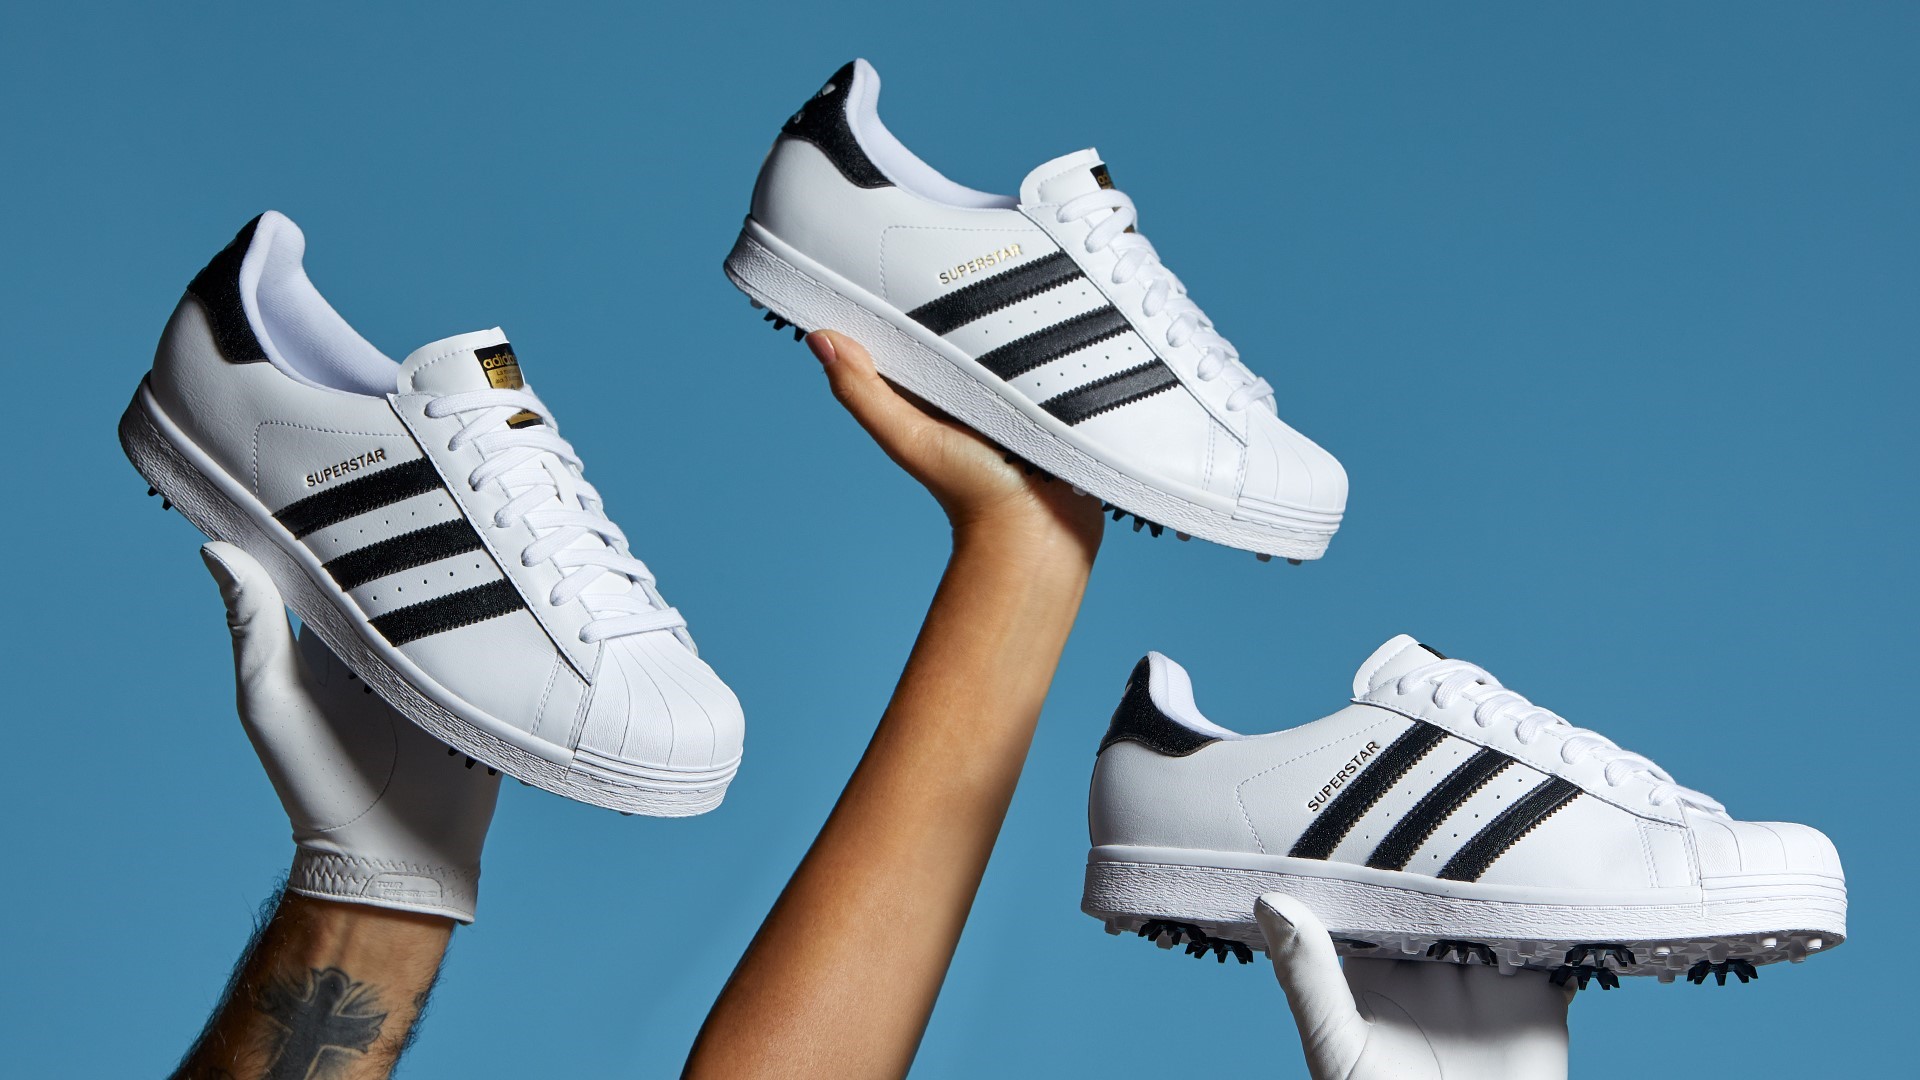 Limited Edition Superstar Brings Iconic 3-Stripes Footwear to the ...